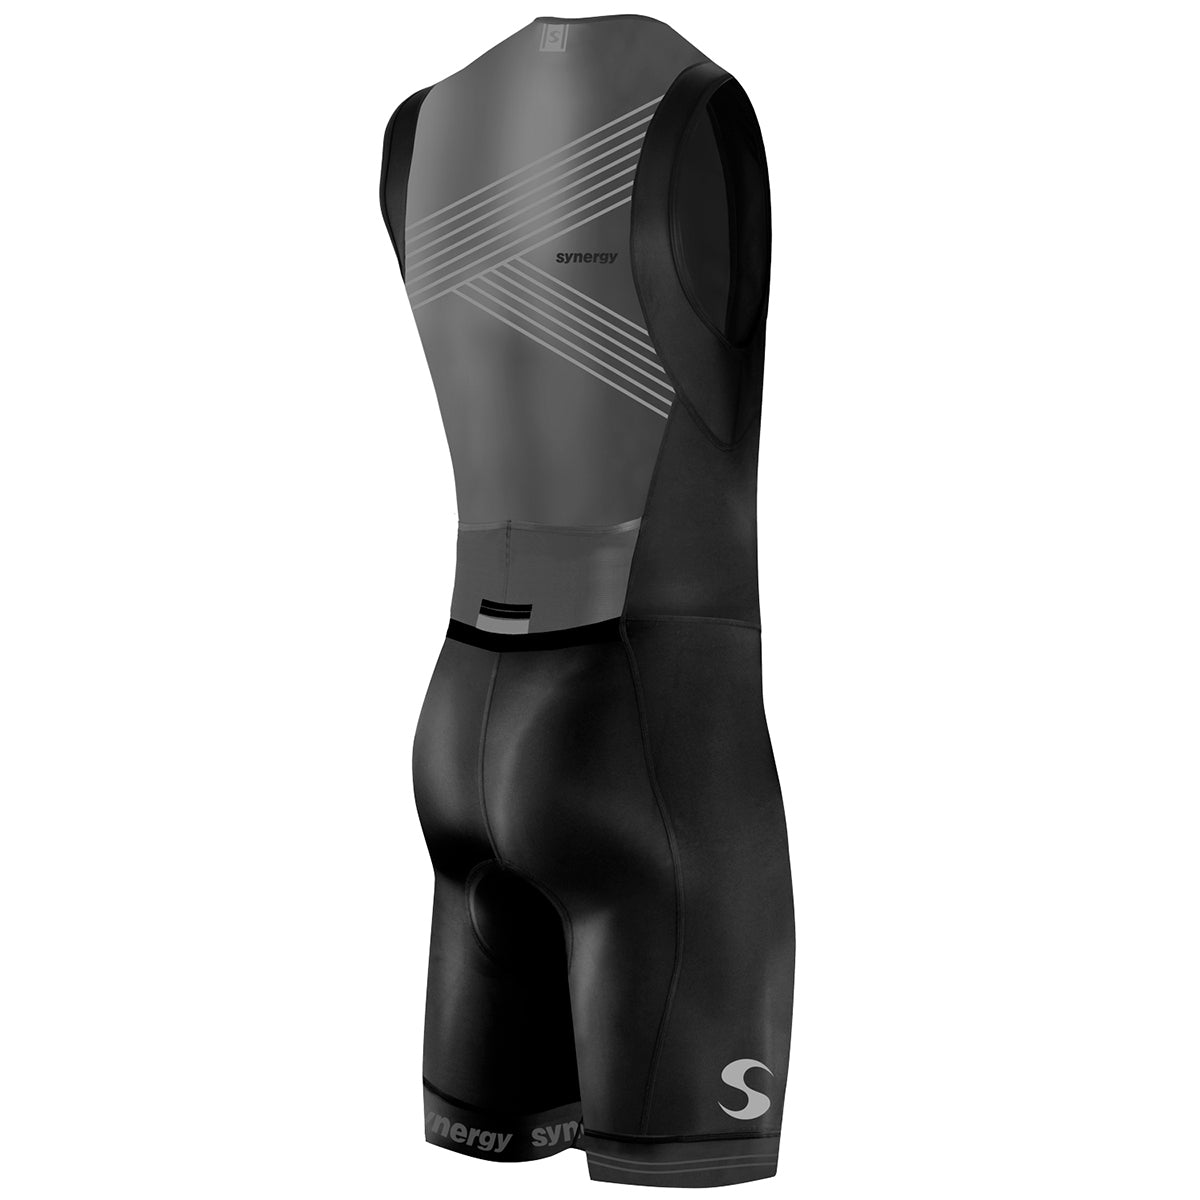 2XU THERMAL 3/4 COMPRESSION TIGHTS - Mike's Bike Shop